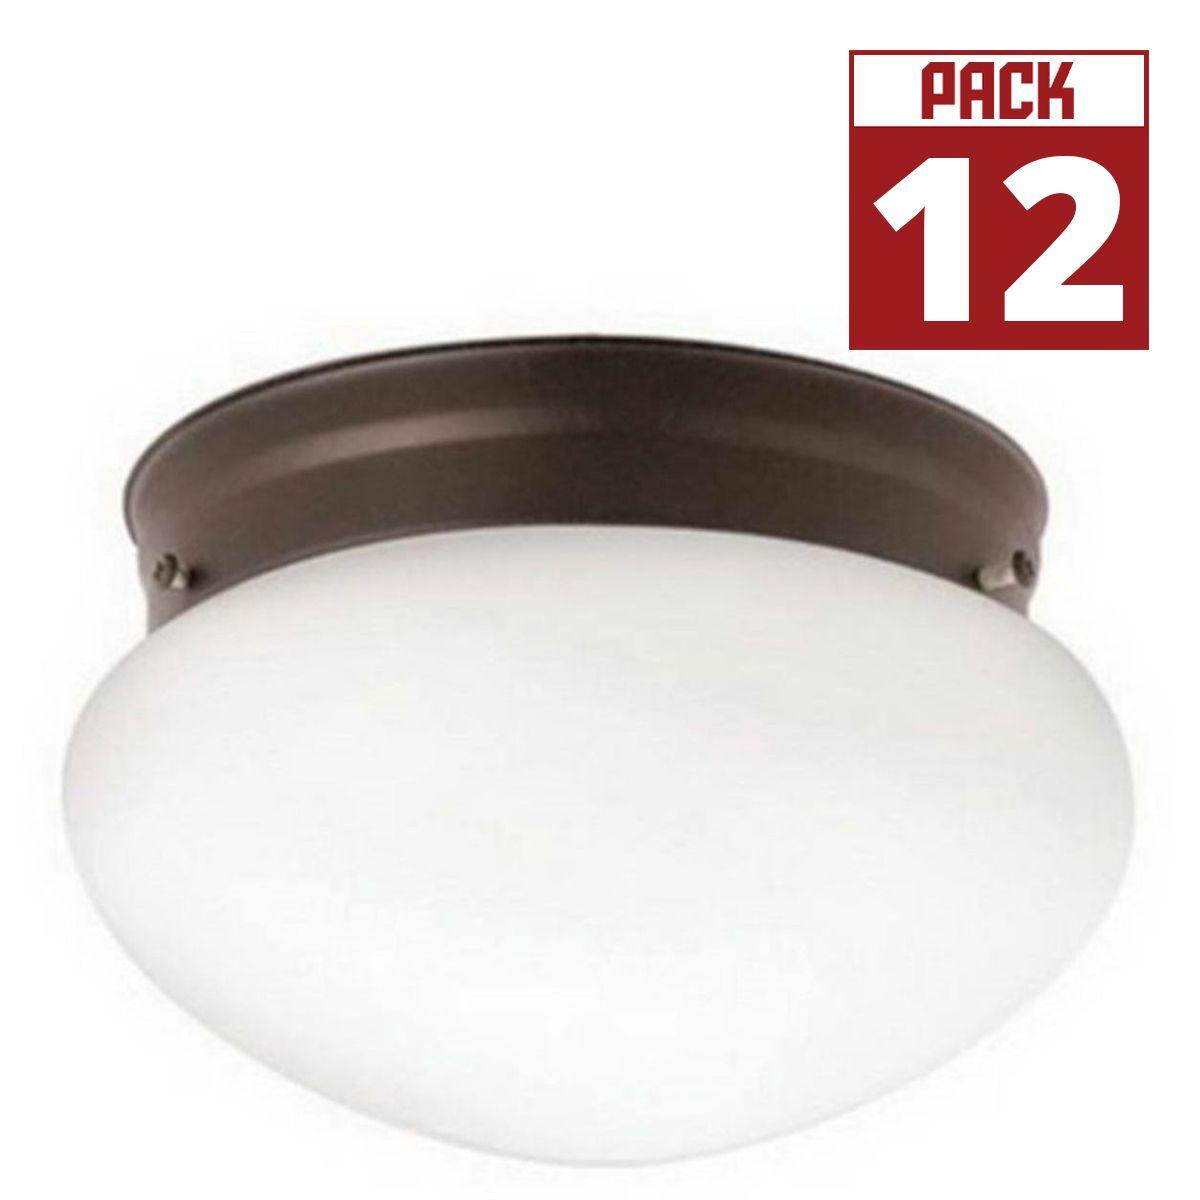 Ceiling Space 8 in. Puff Light (Case of 12)